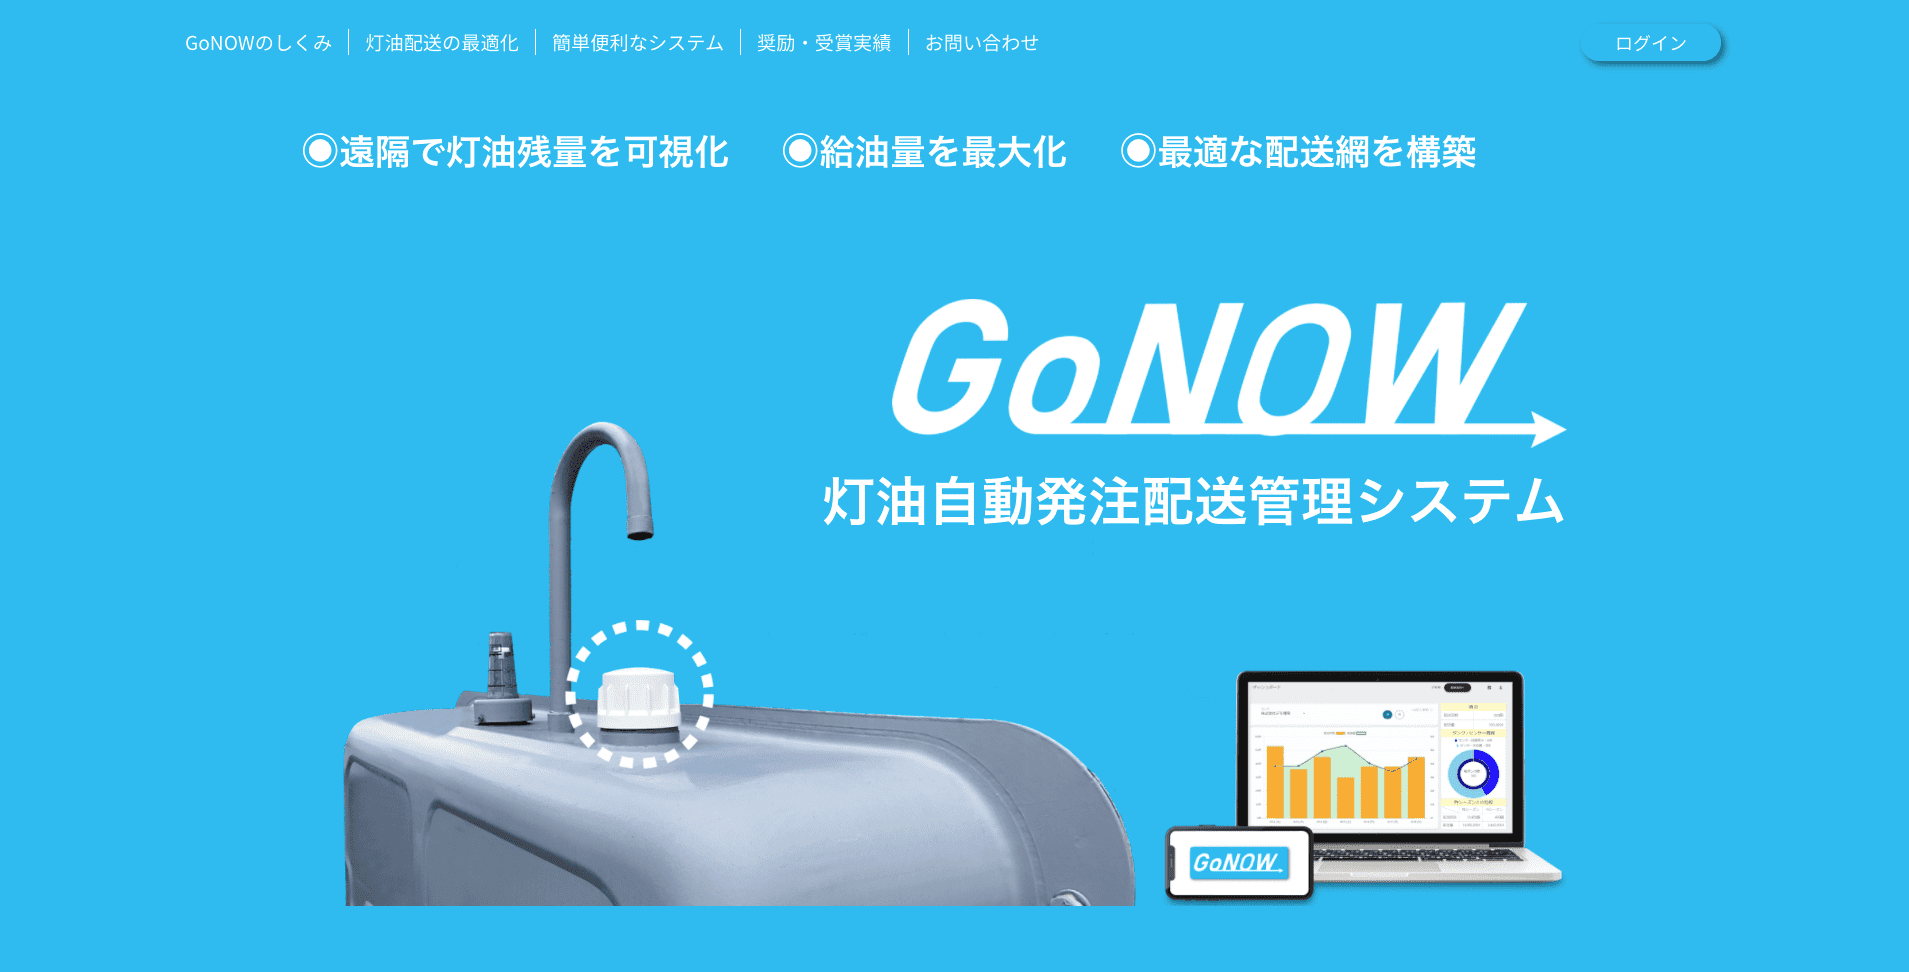 gonow landing page